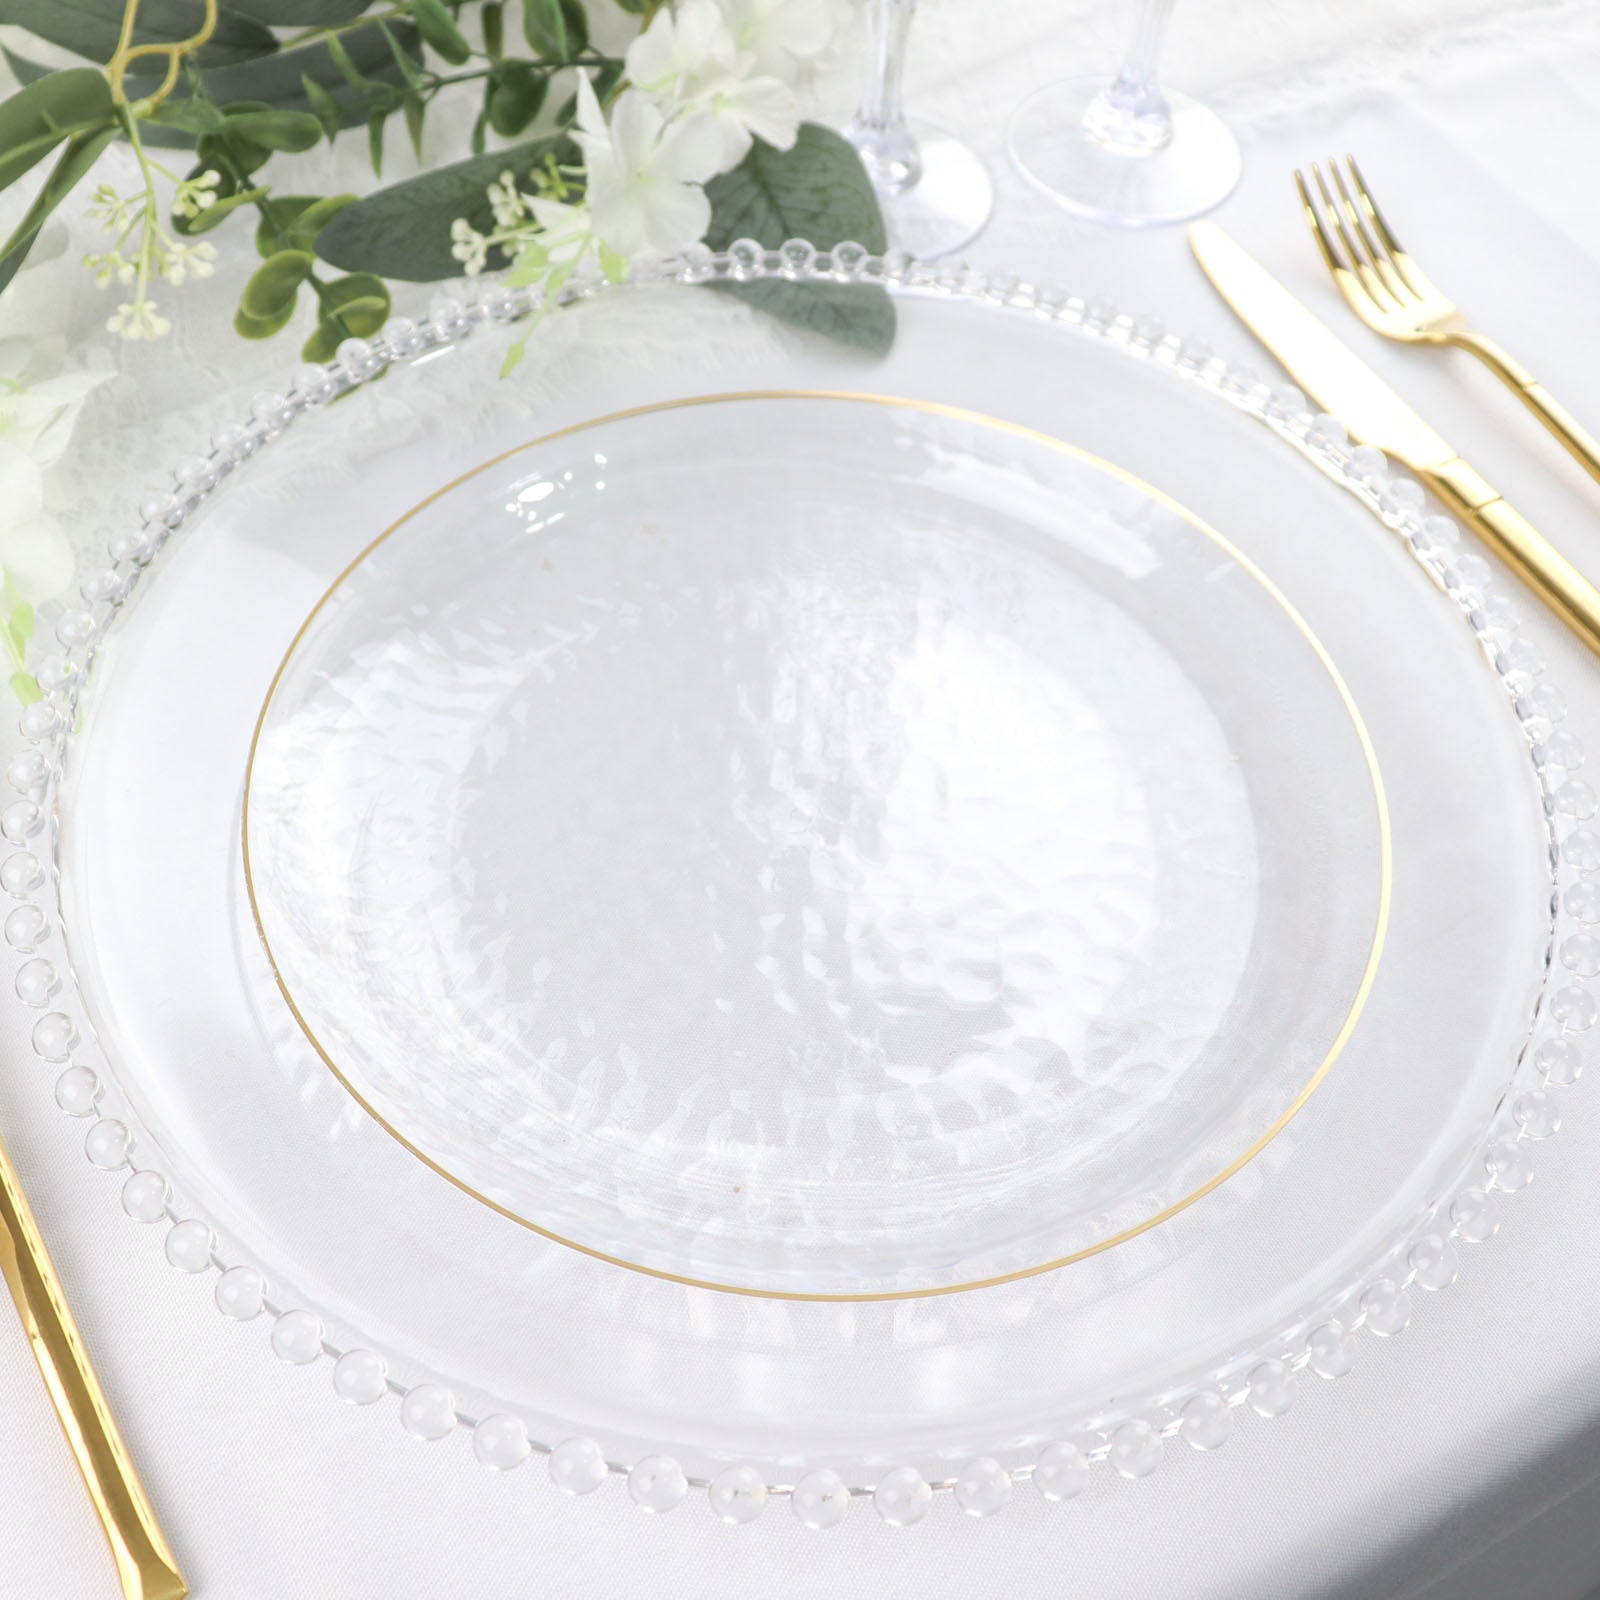 Clear Gold-Trimmed Hammered Disposable Plastic Plates 40 Pcs Combo Pack Size: 10.25 in | Wedding | Event | Wholesale by CV Linens